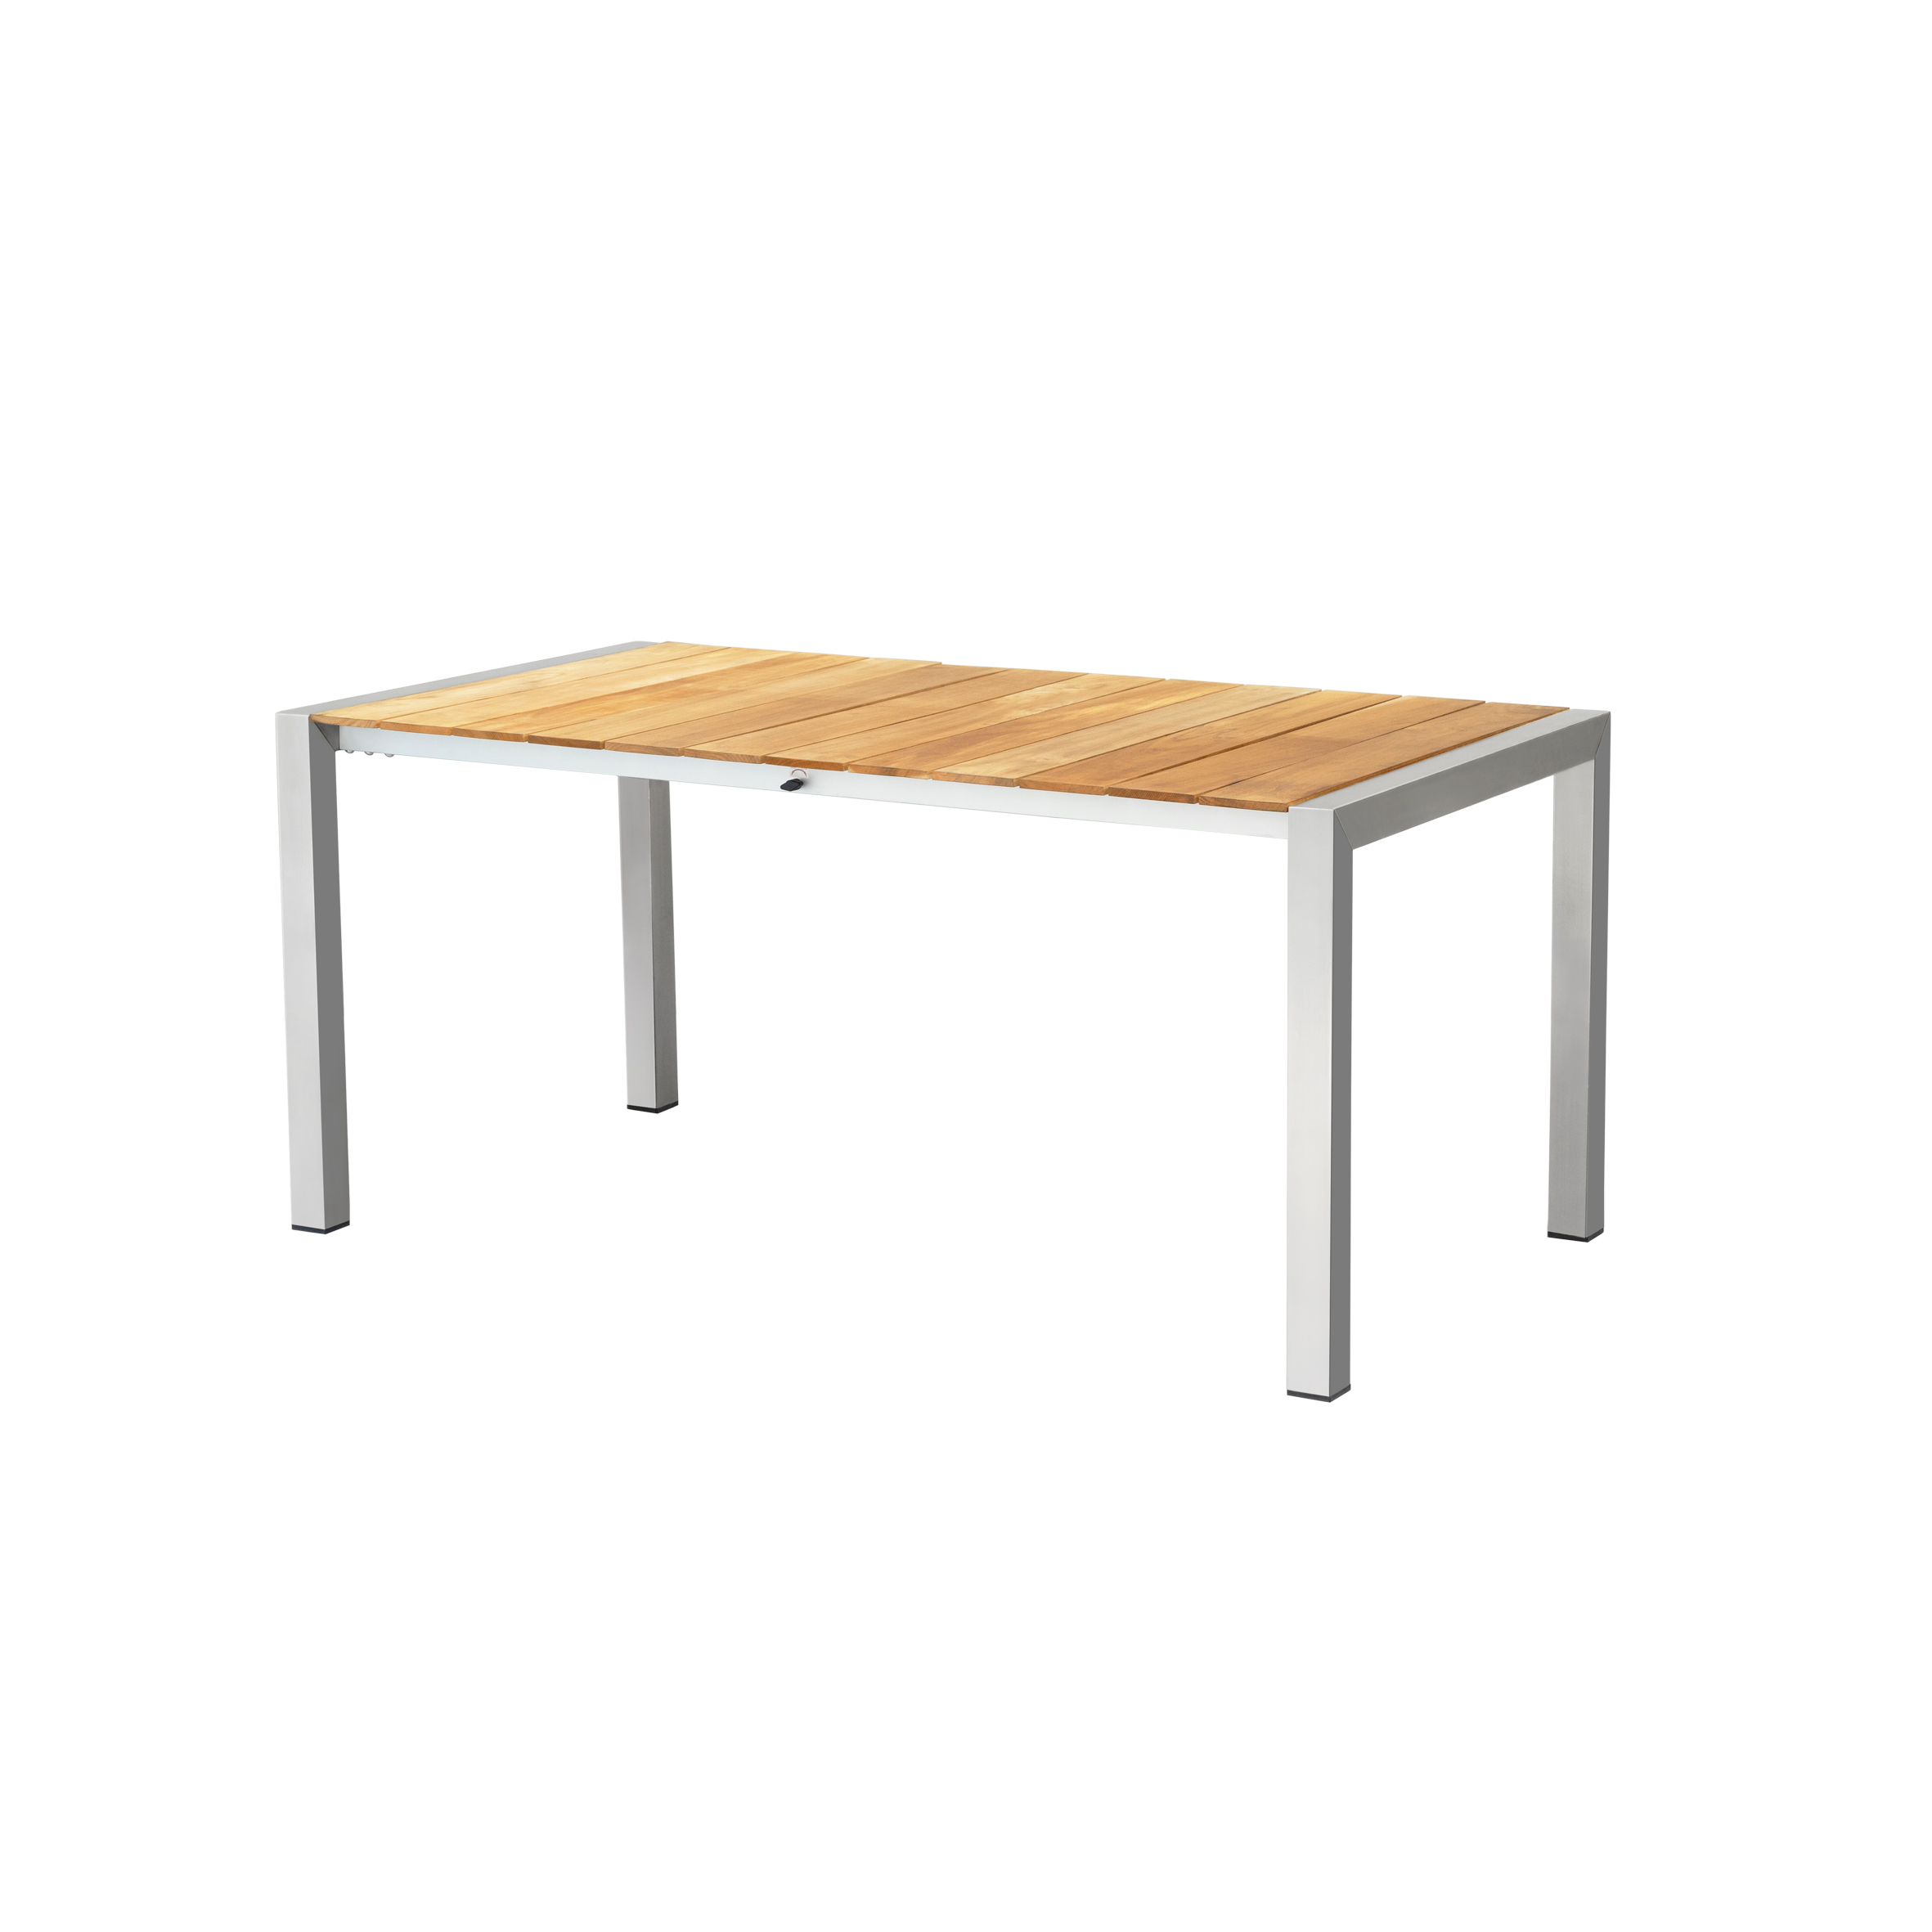 Alps manual extension table S2